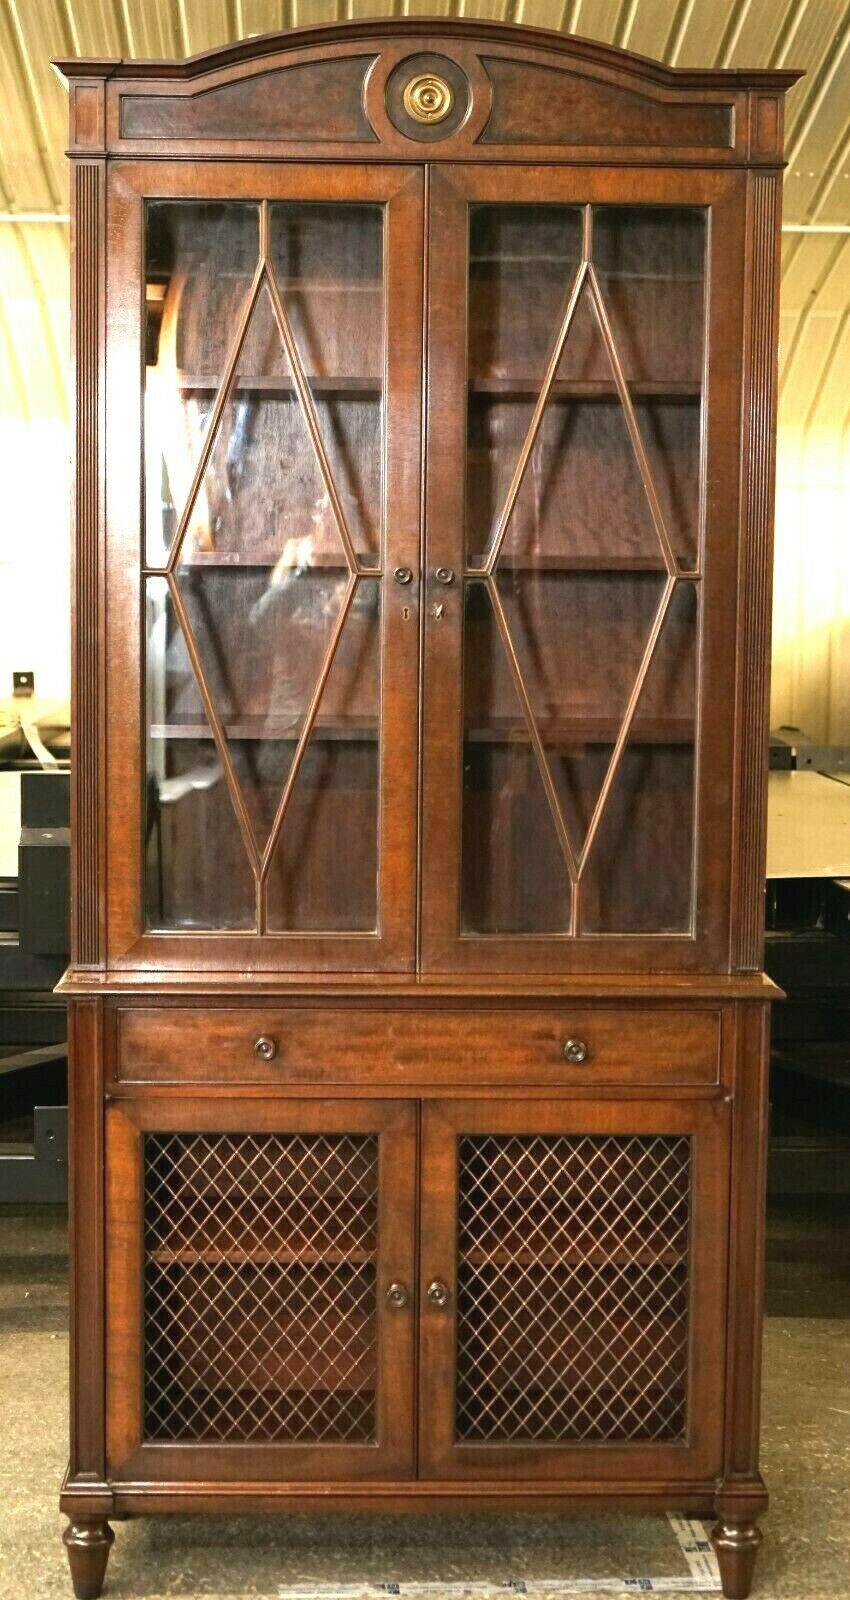 We are delighted to offer for sale this gorgeous vintage cabinet/dresser with metal mesh on the bottom doors.

It comes with one key that works on both doors, it has three adjustable shelves on the top part and one also adjustable in the bottom